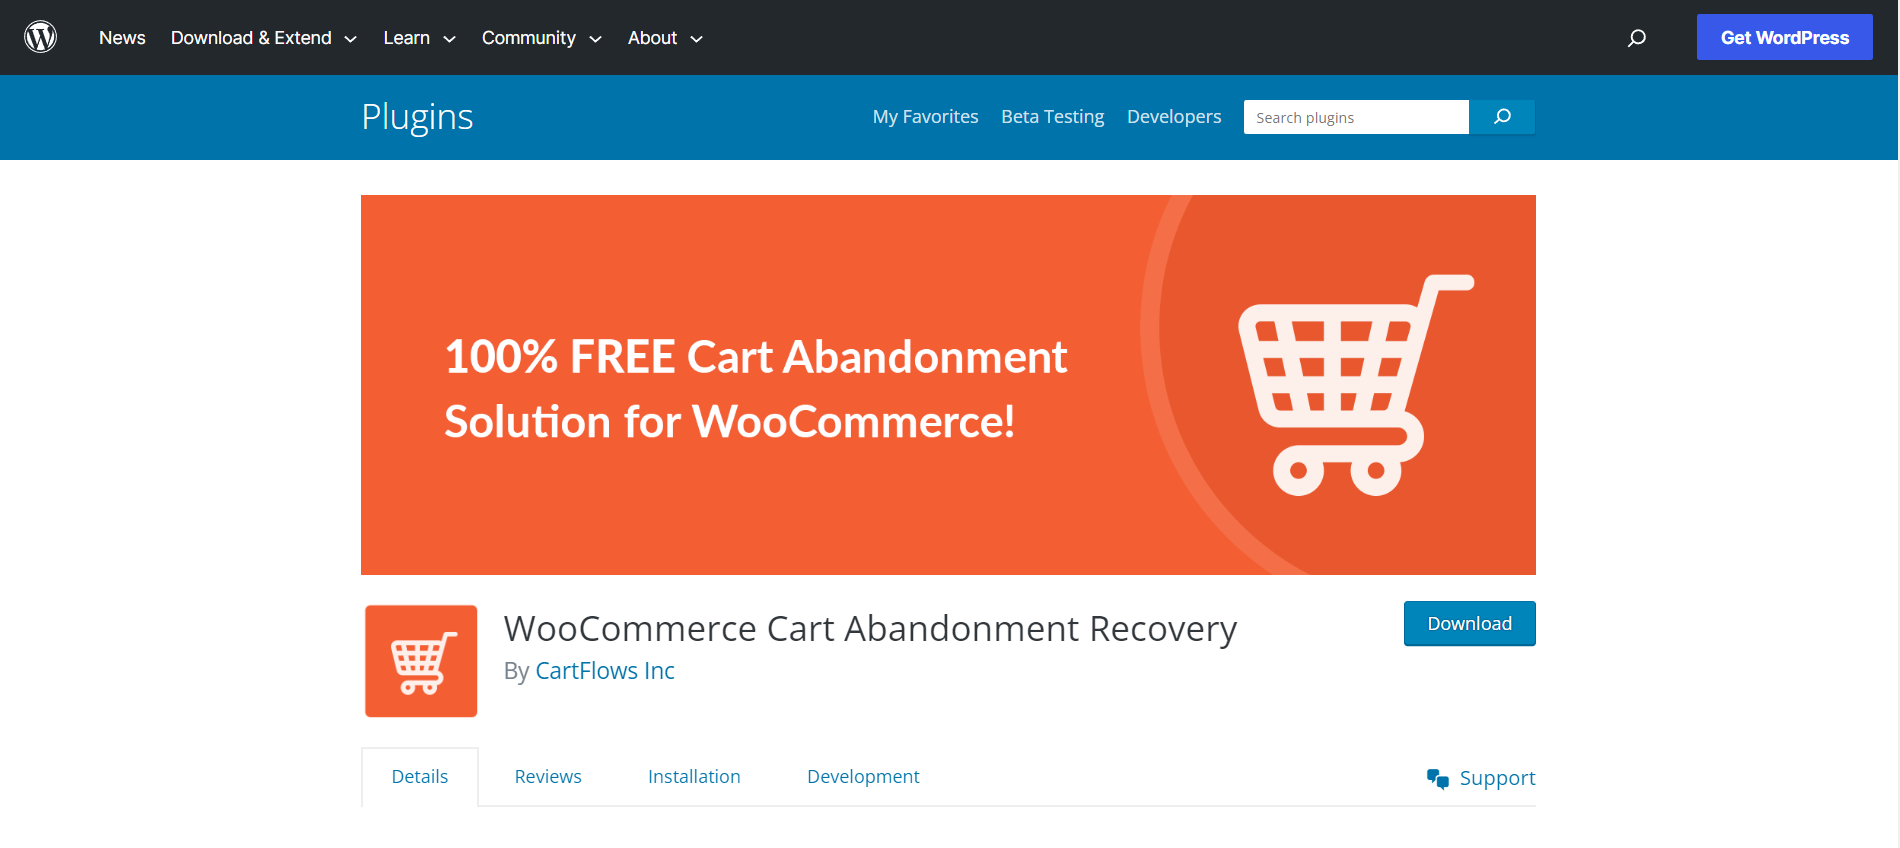 Cart Abandonment Recovery